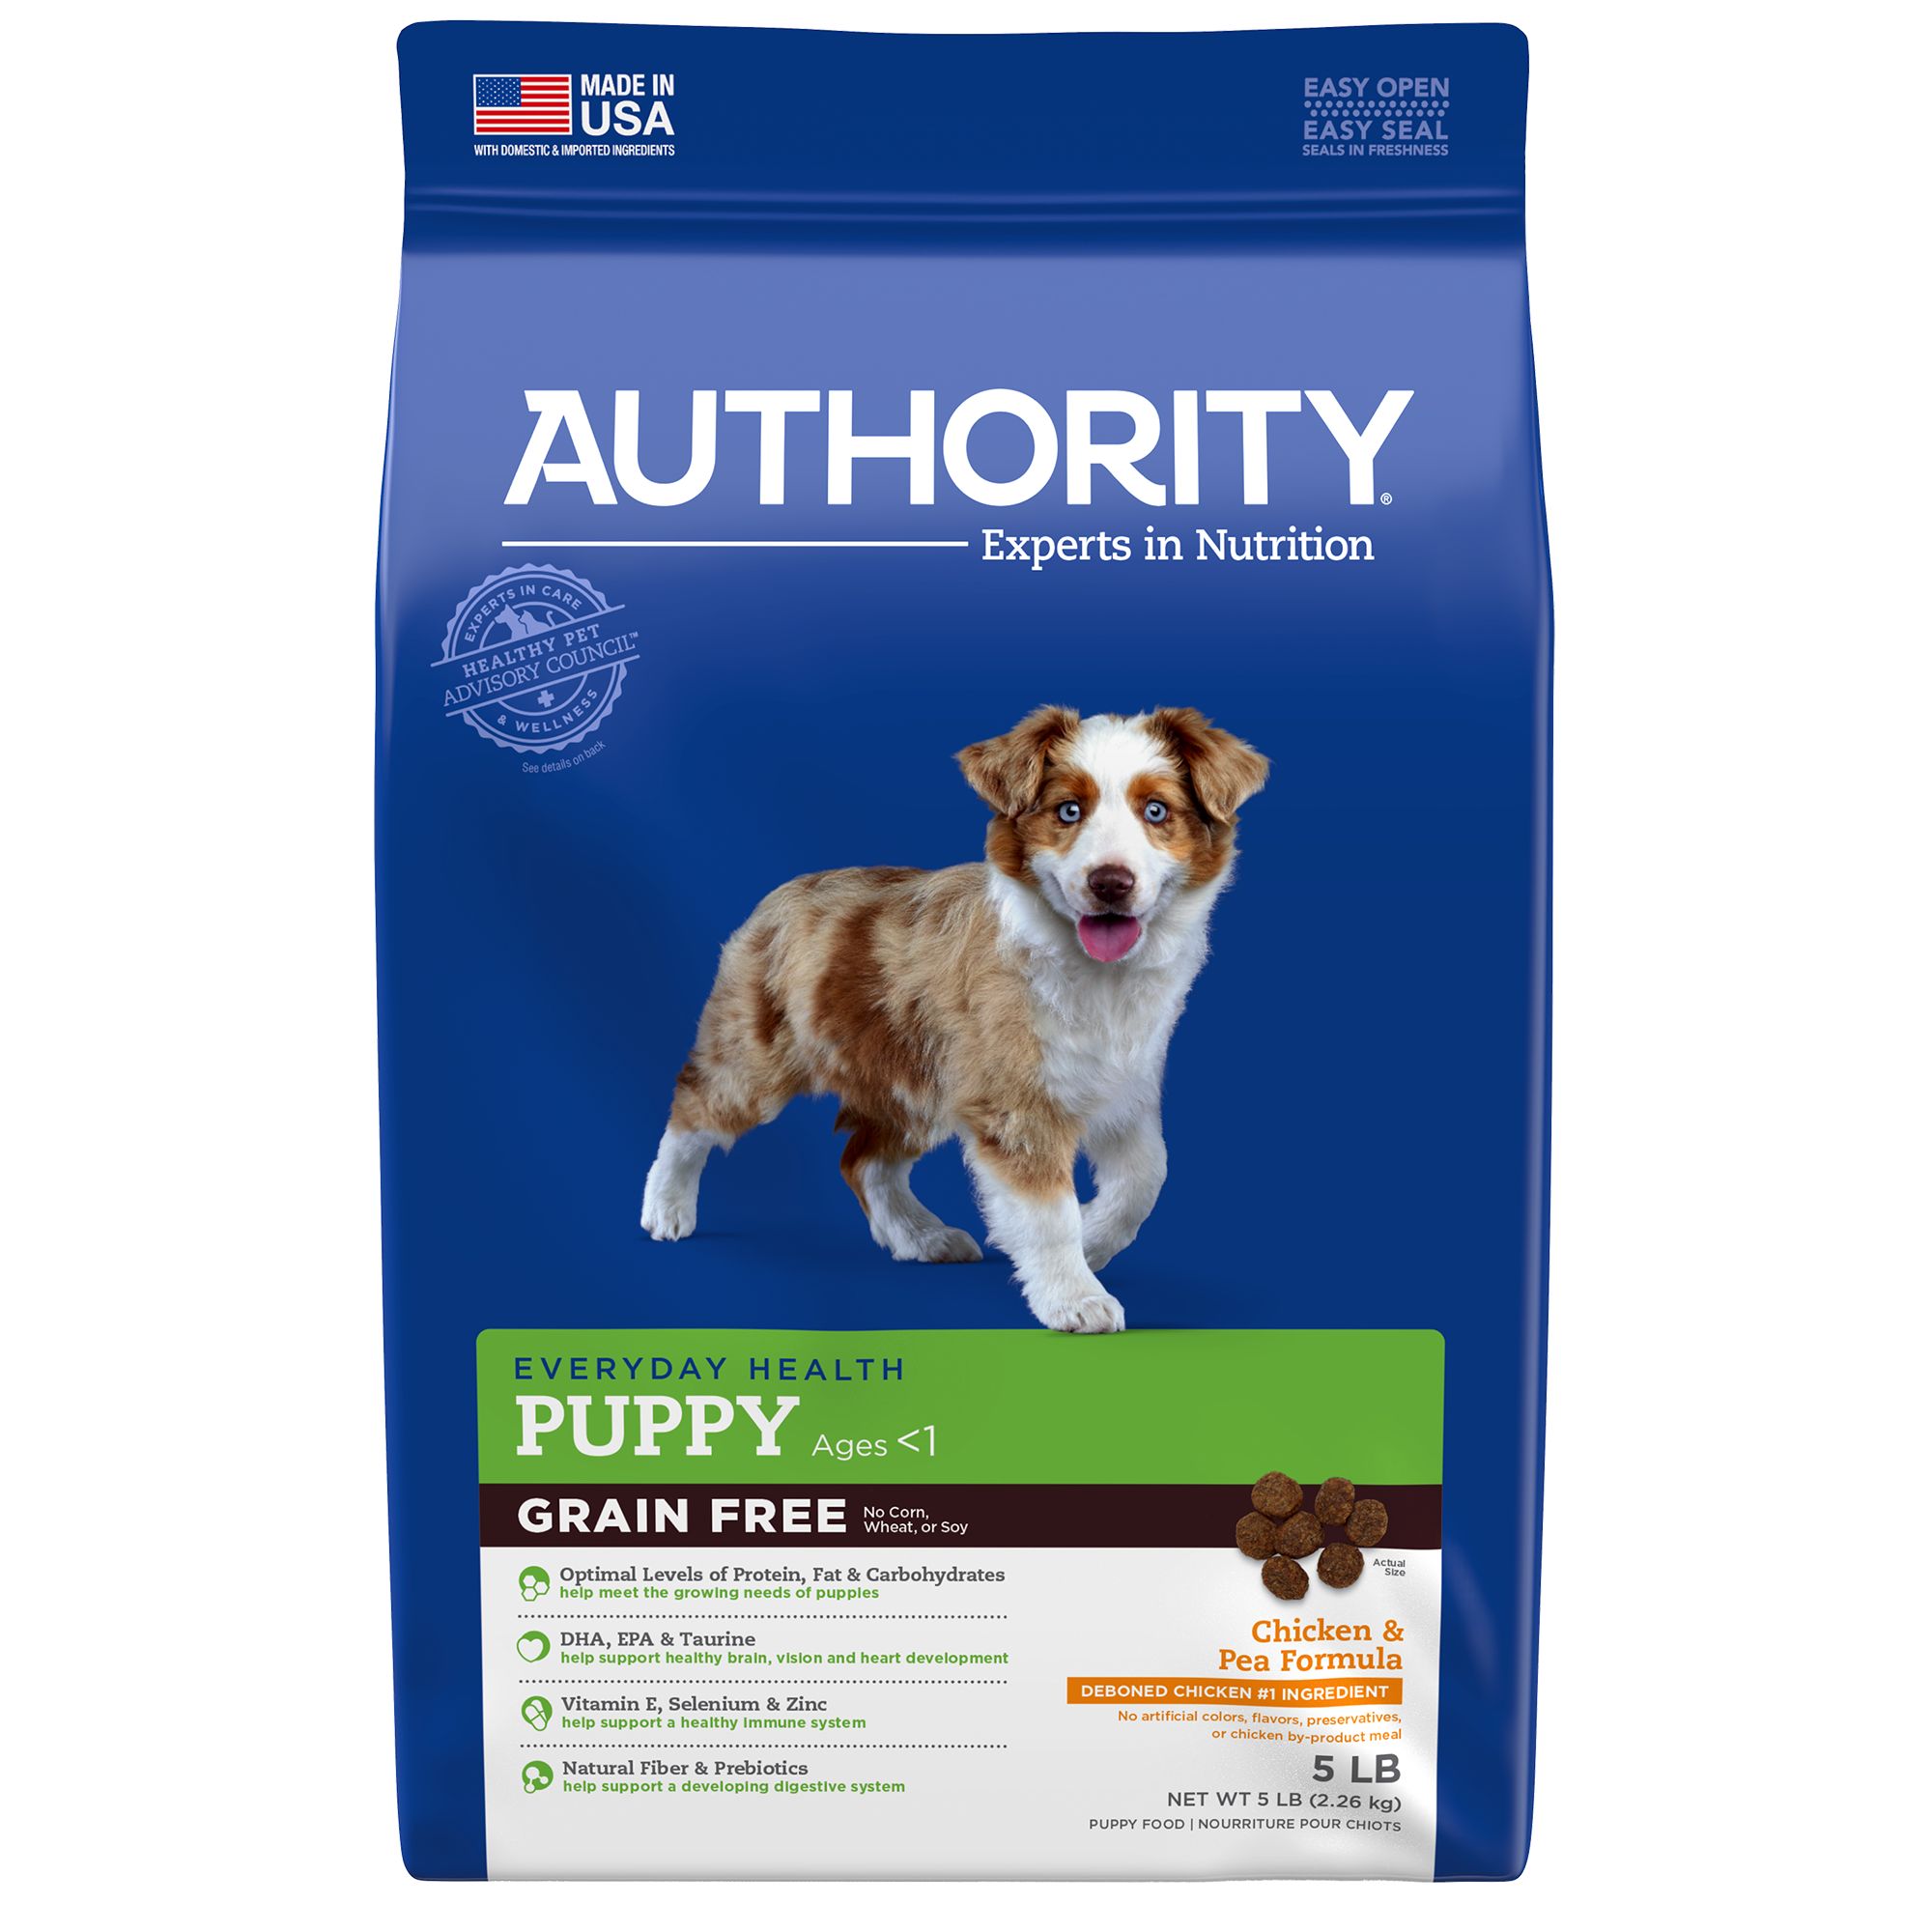 Authority Puppy Food - Grain Free, Chicken & Pea